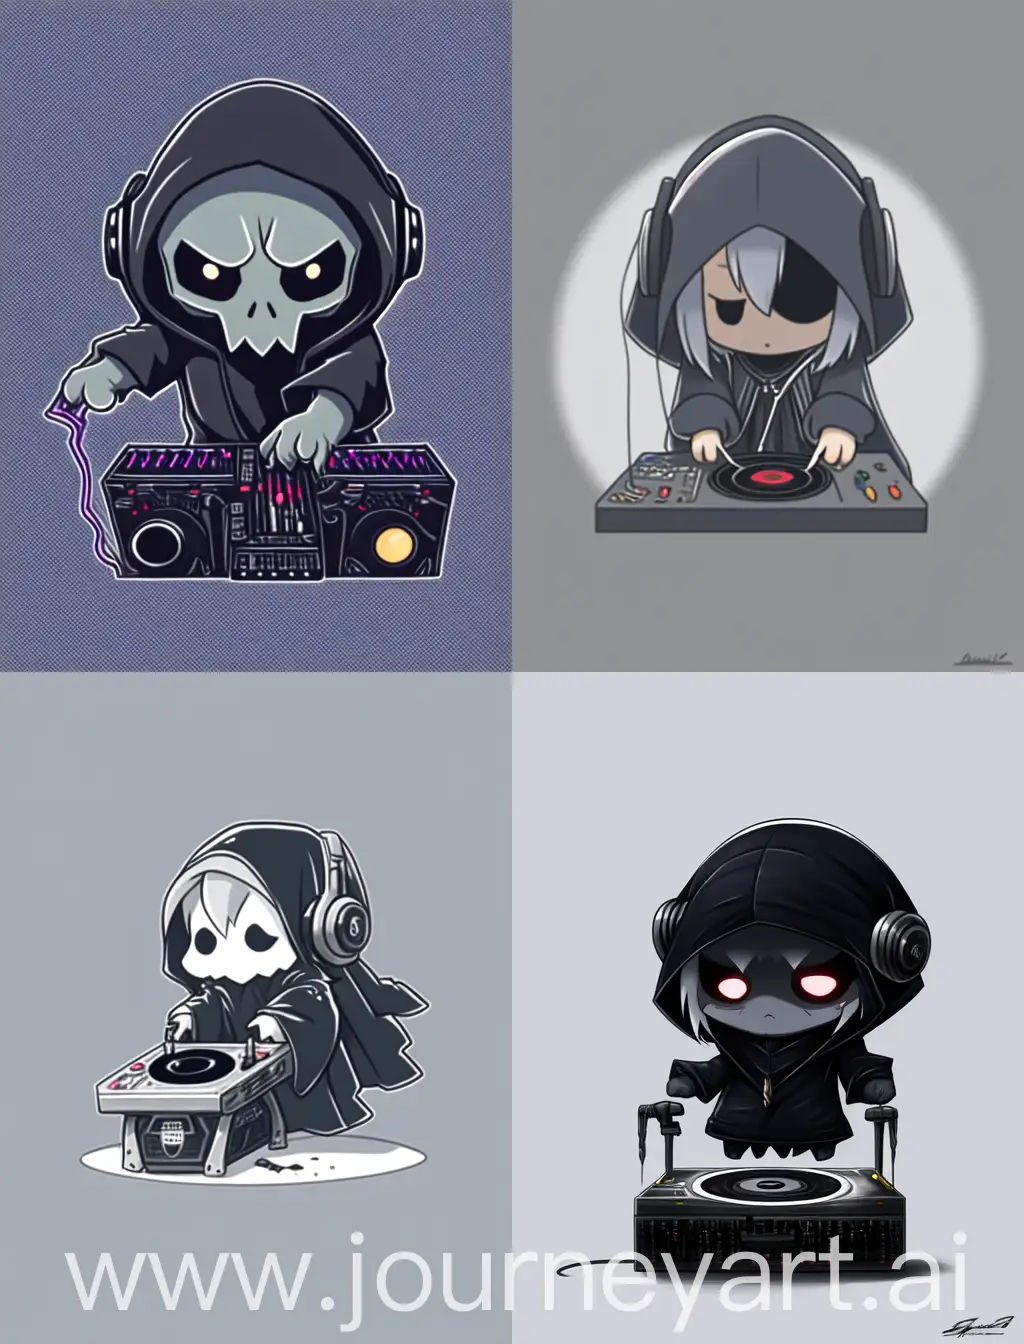 Grim-Reaper-Chibi-DJ-Animated-Anime-Character-with-Vibrant-Lines-on-Grey-Background